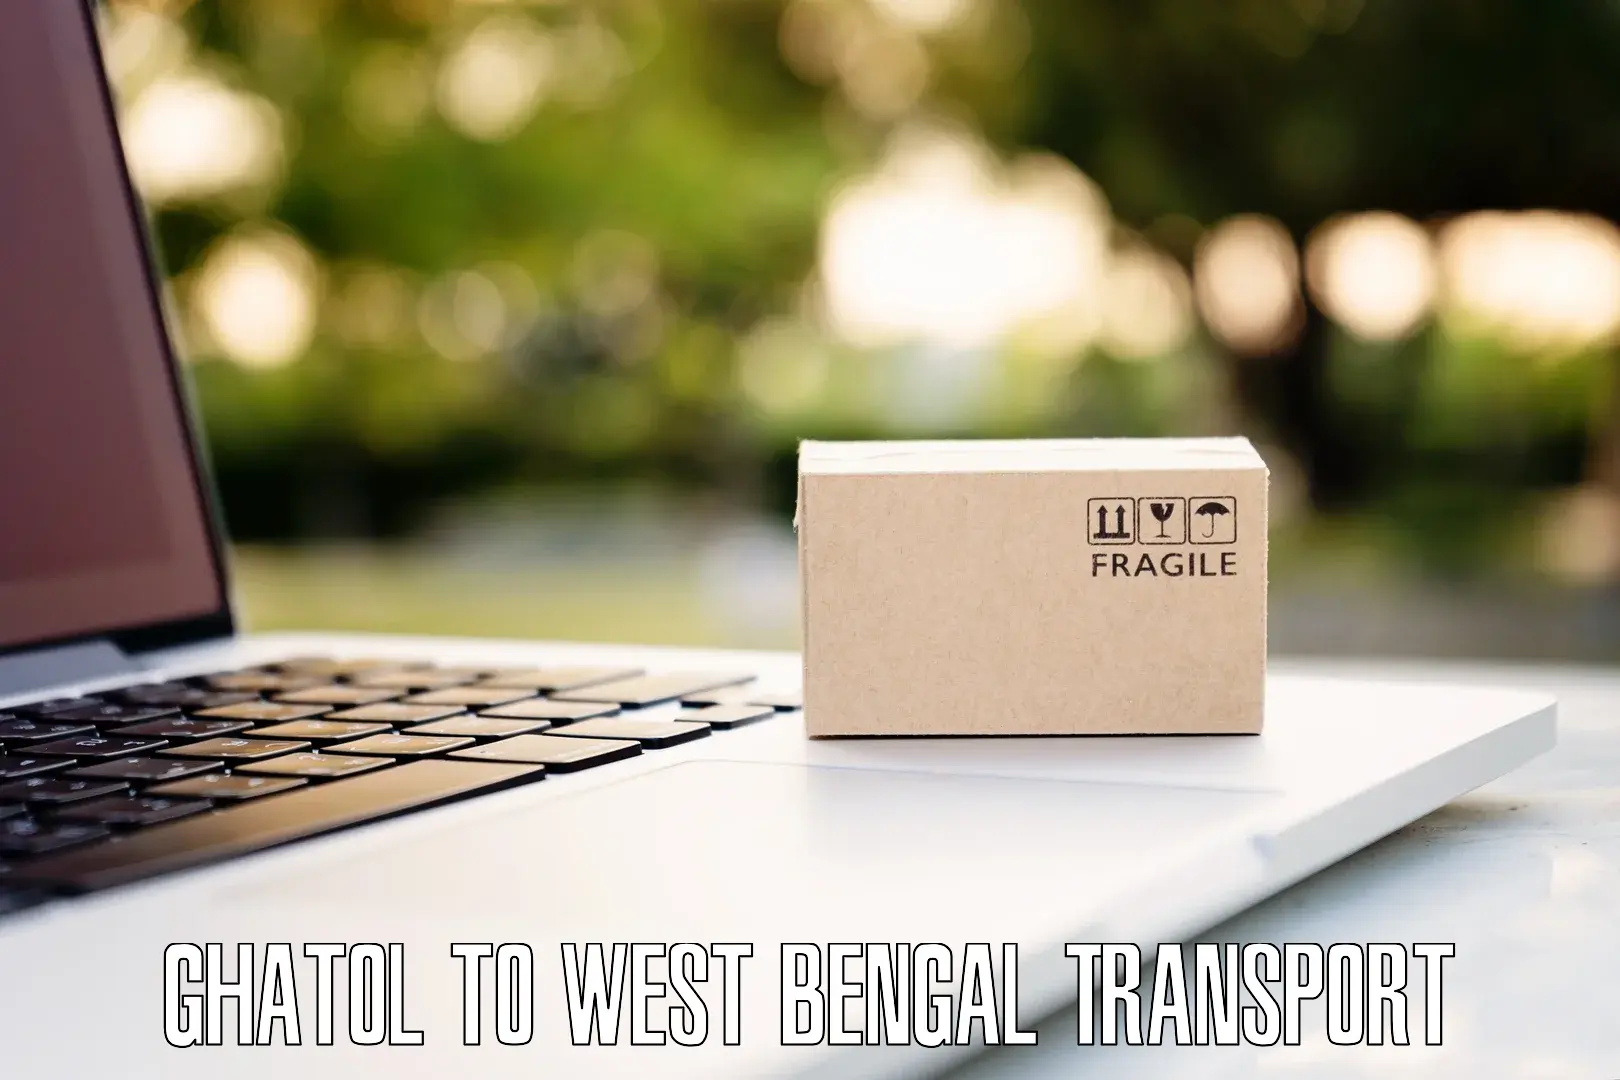 Daily transport service Ghatol to West Bengal